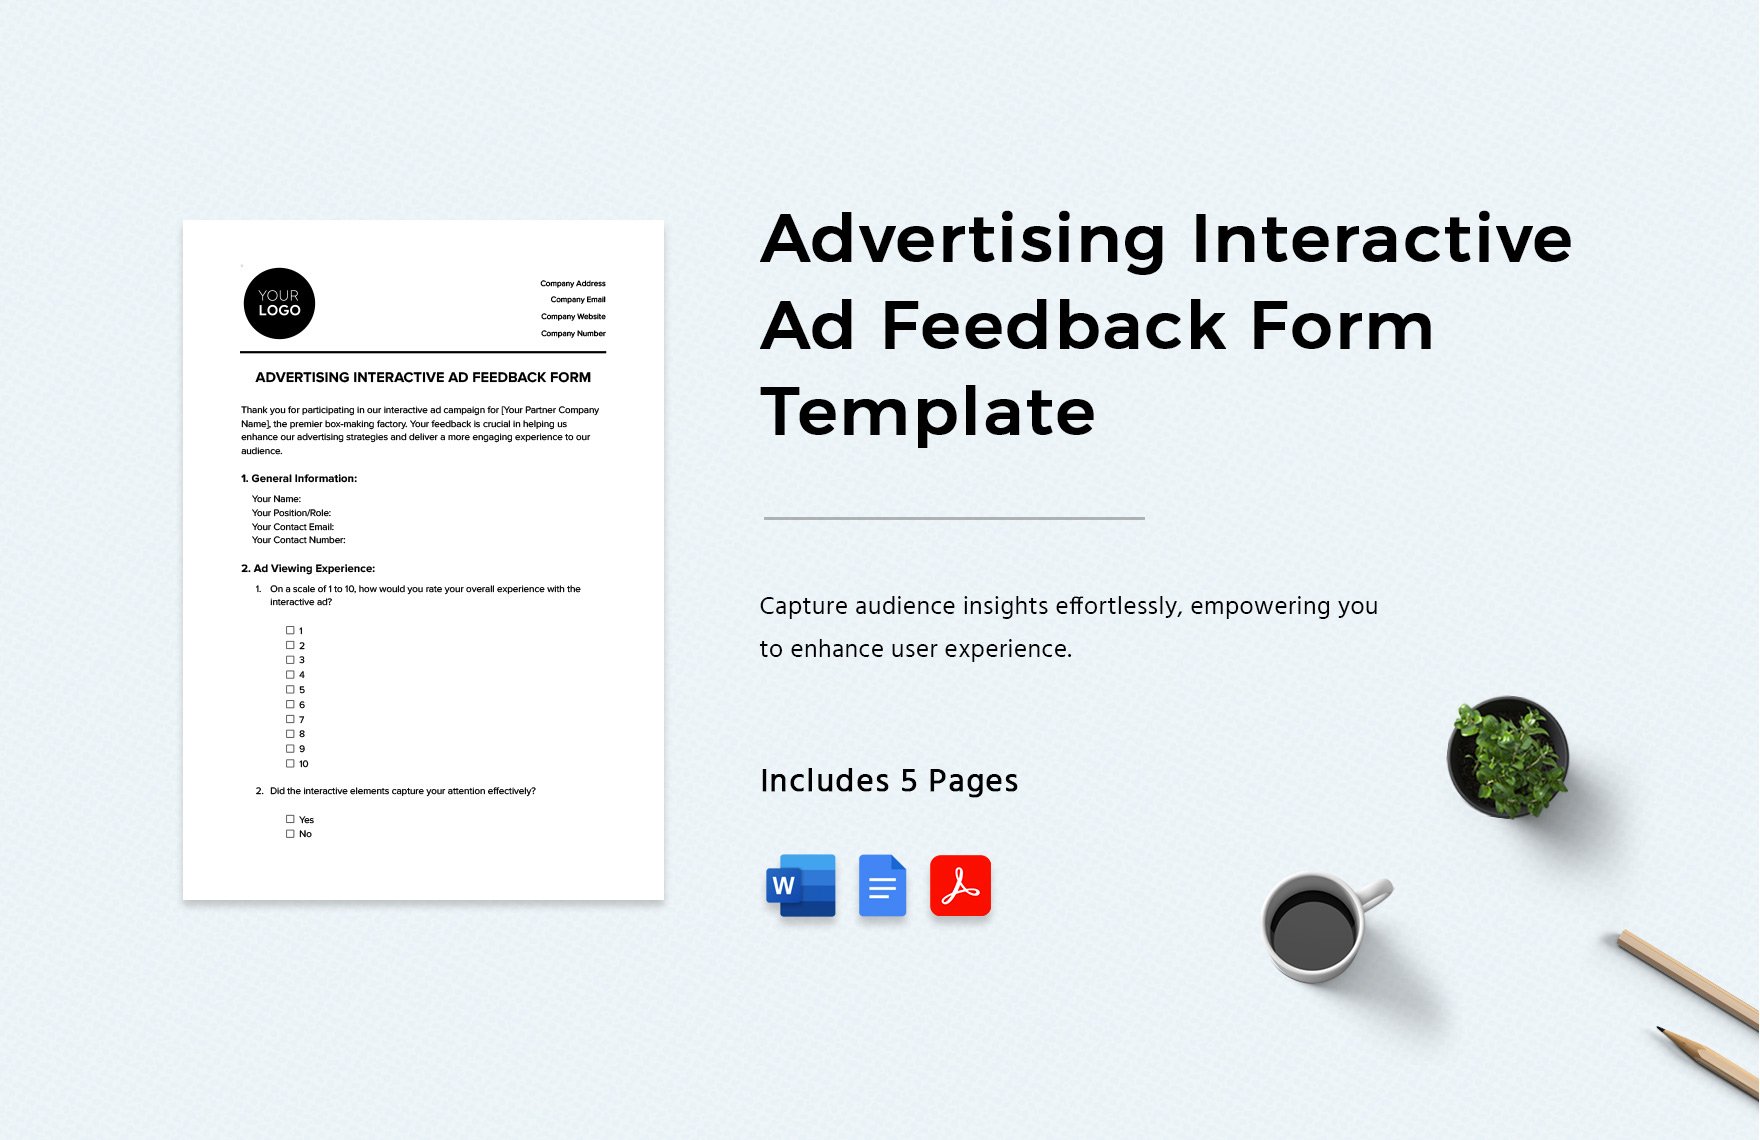 Advertising Interactive Ad Feedback Form Template in Word, Google Docs, PDF